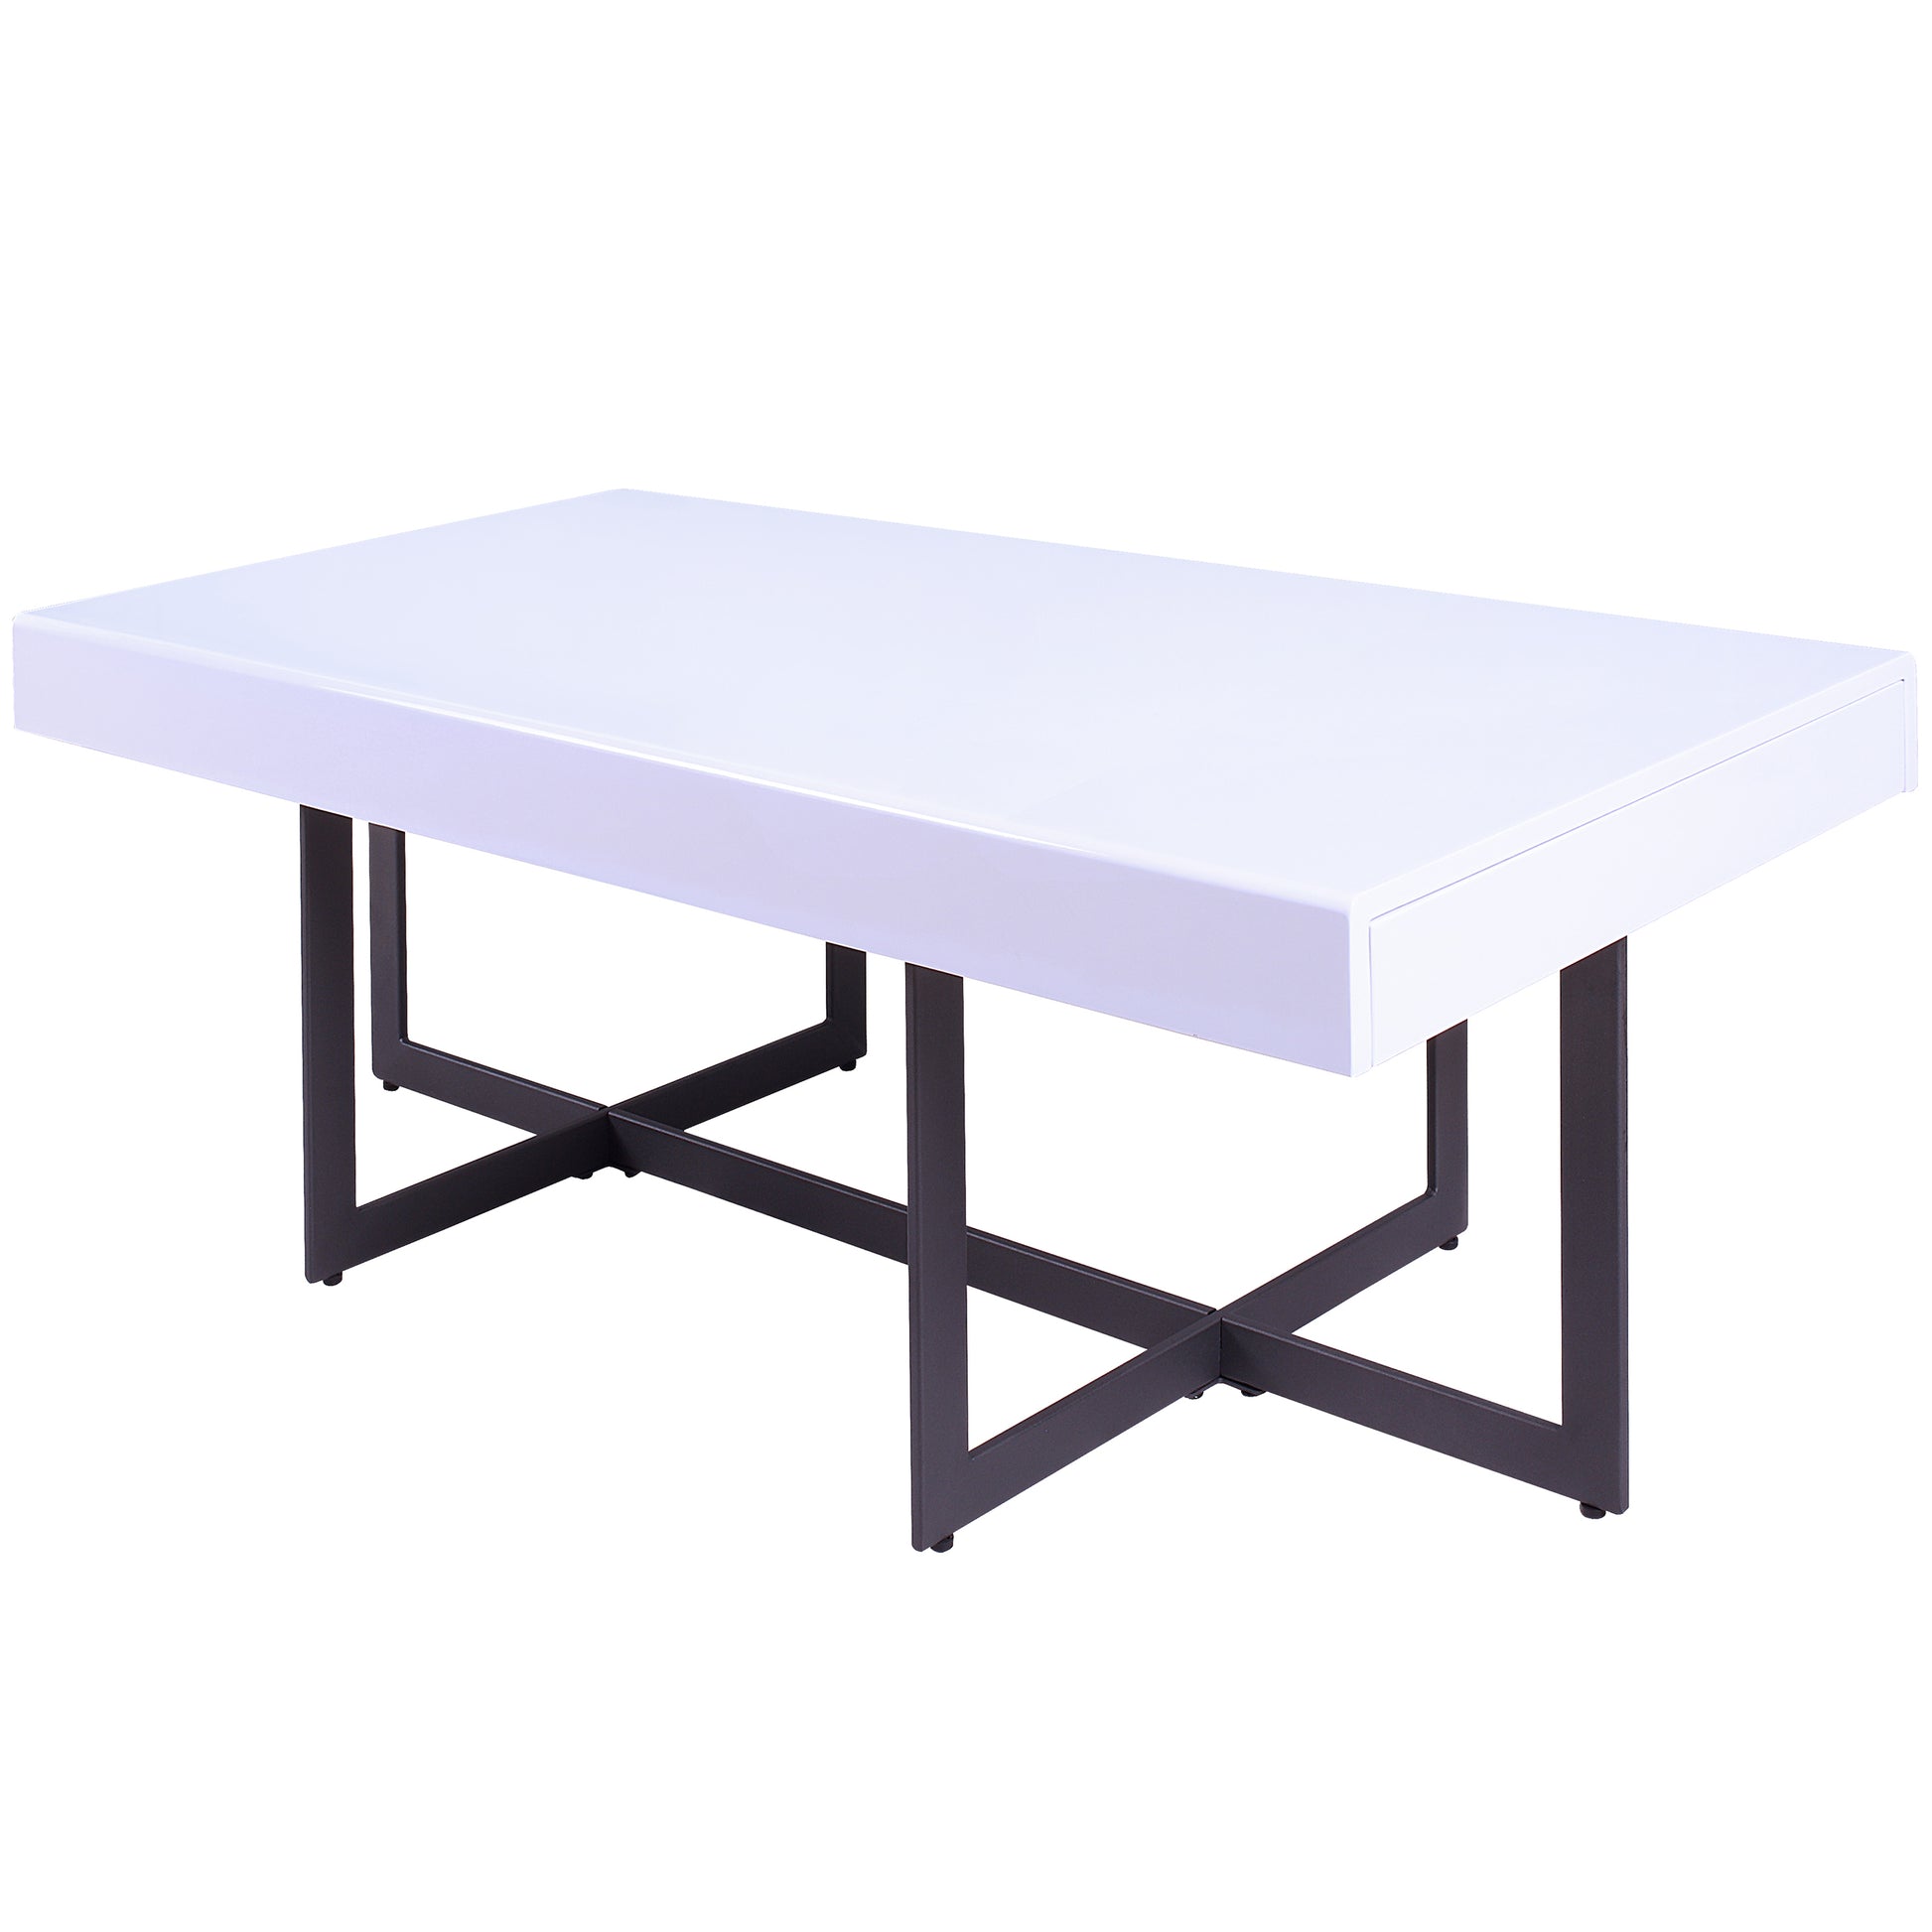 Left angled coffee table only from a two-piece modern white high gloss and gunmetal storage coffee table set with hidden drawers on a white background